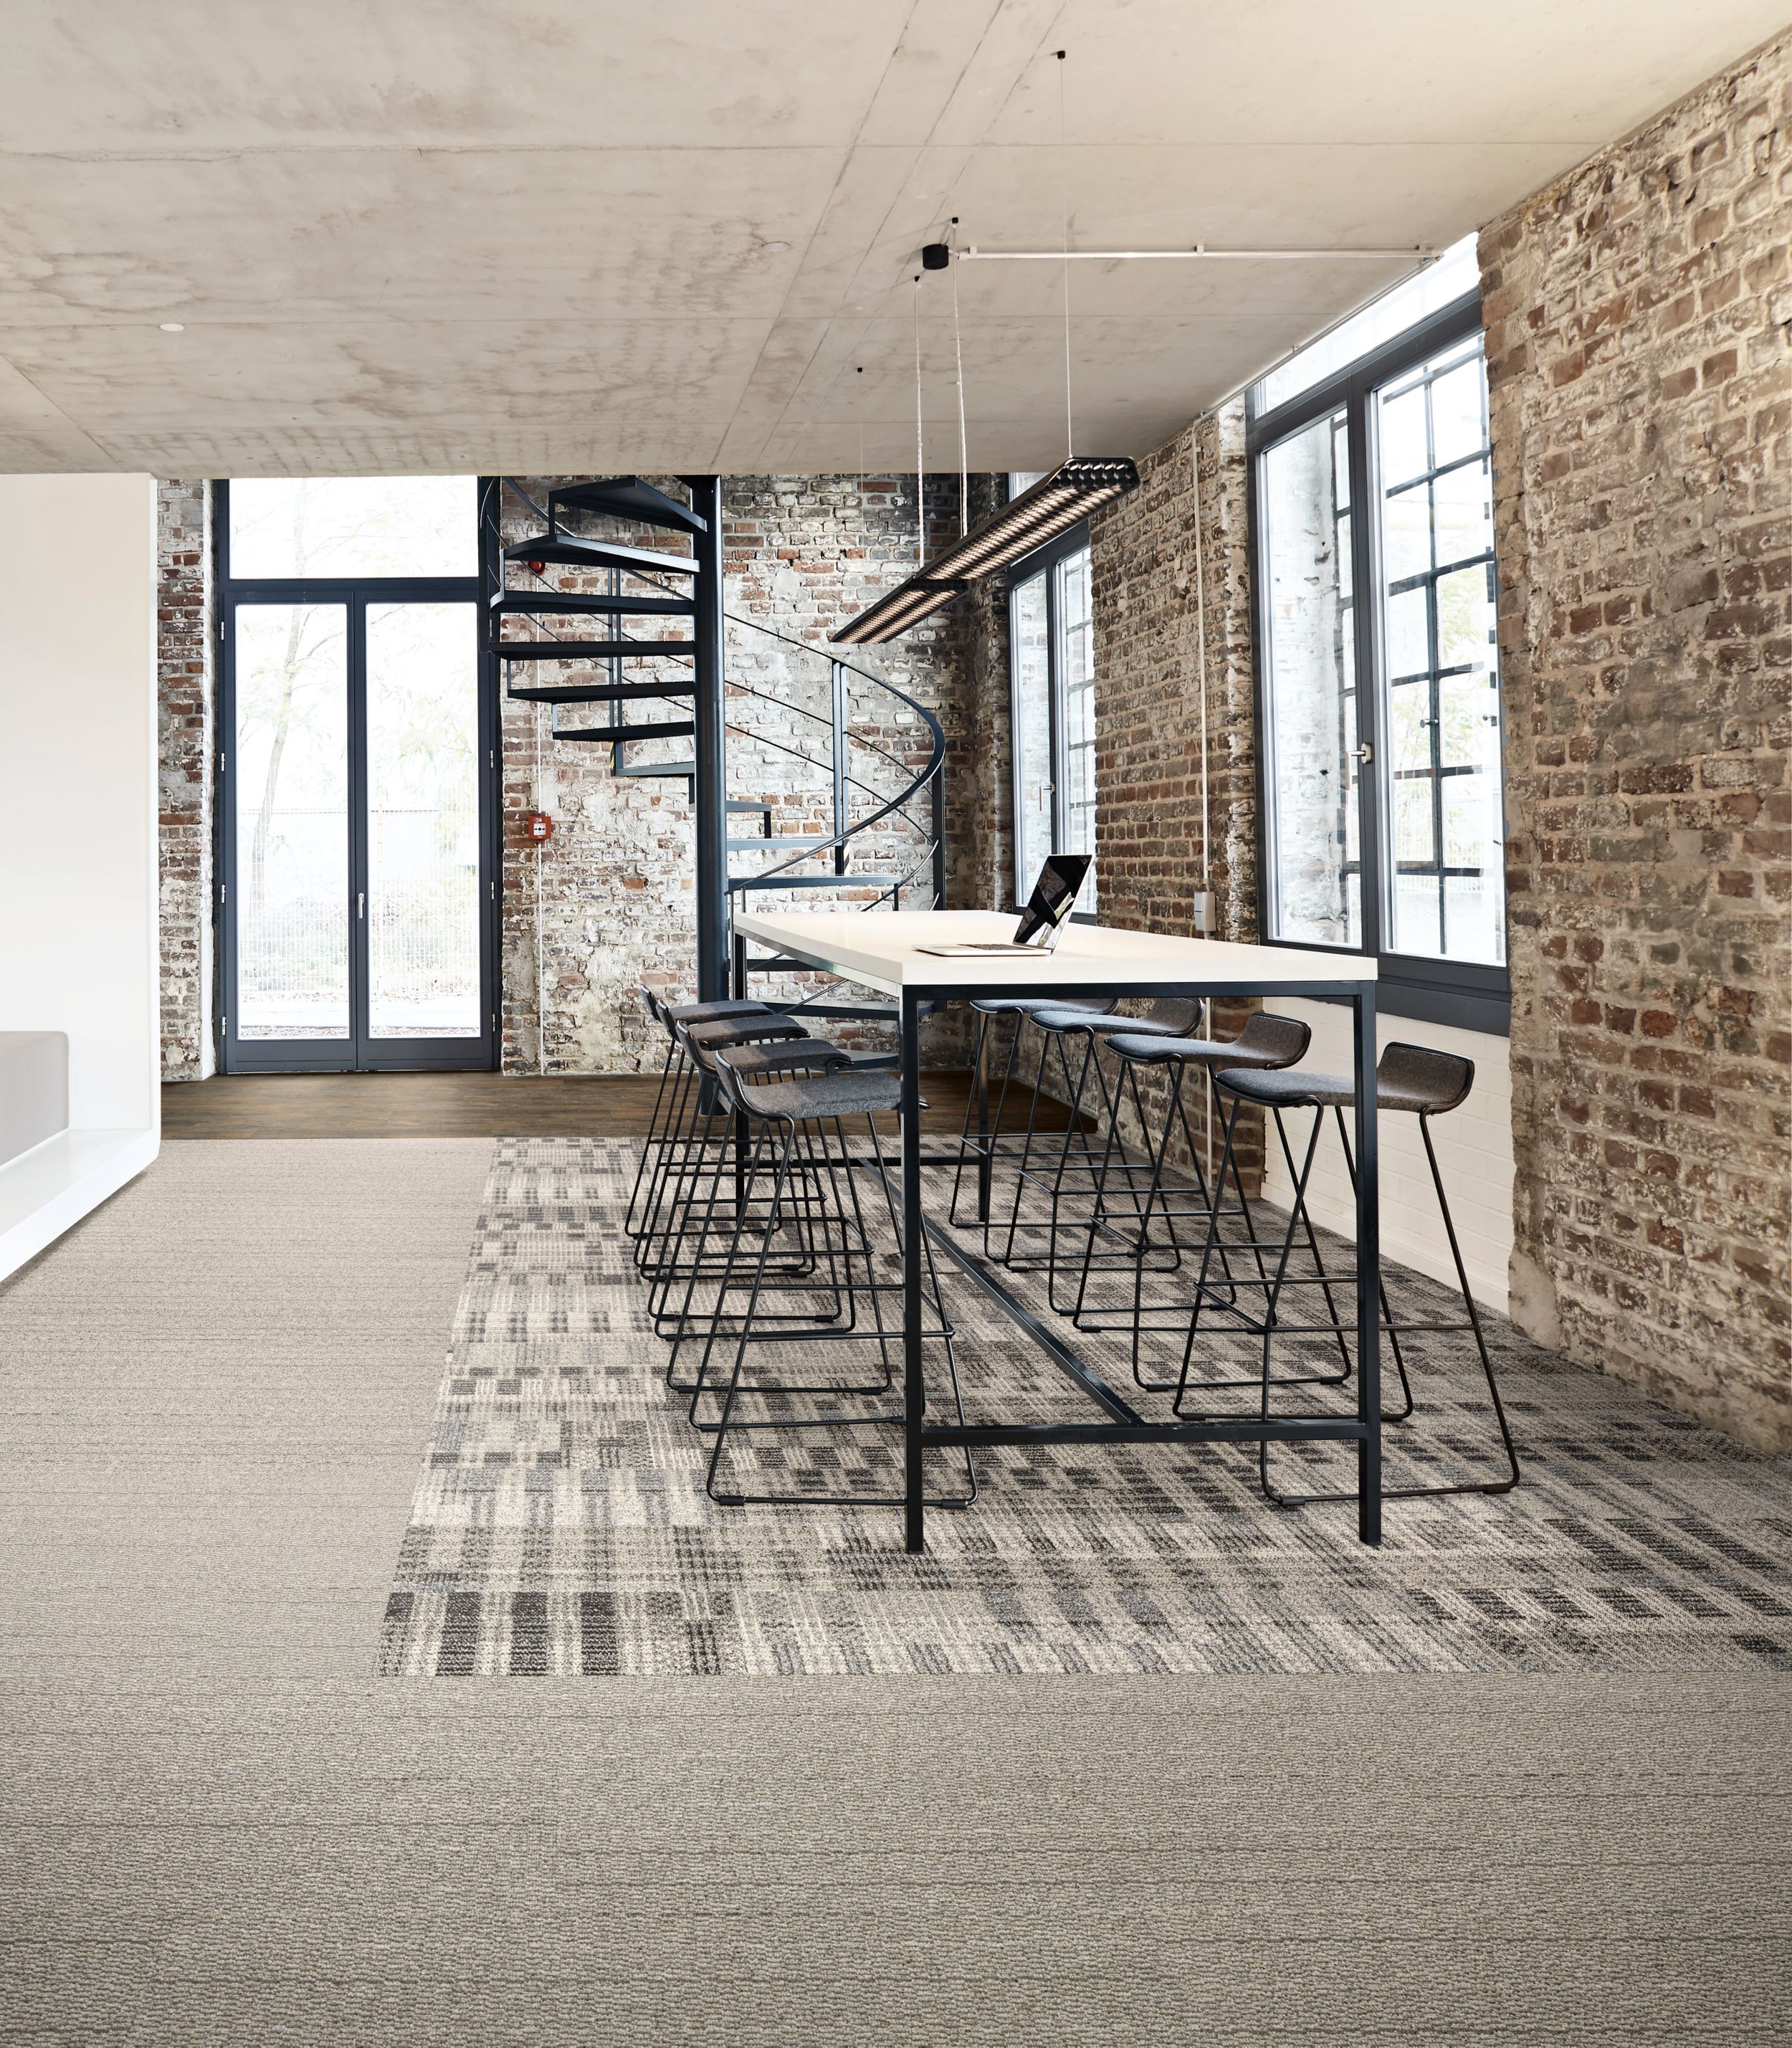 Interface Loom of Life and Tangled & Taut plank carpet tile with Textured Woodgrains LVT in seating area with brick walls and spiral staircase in background image number 3